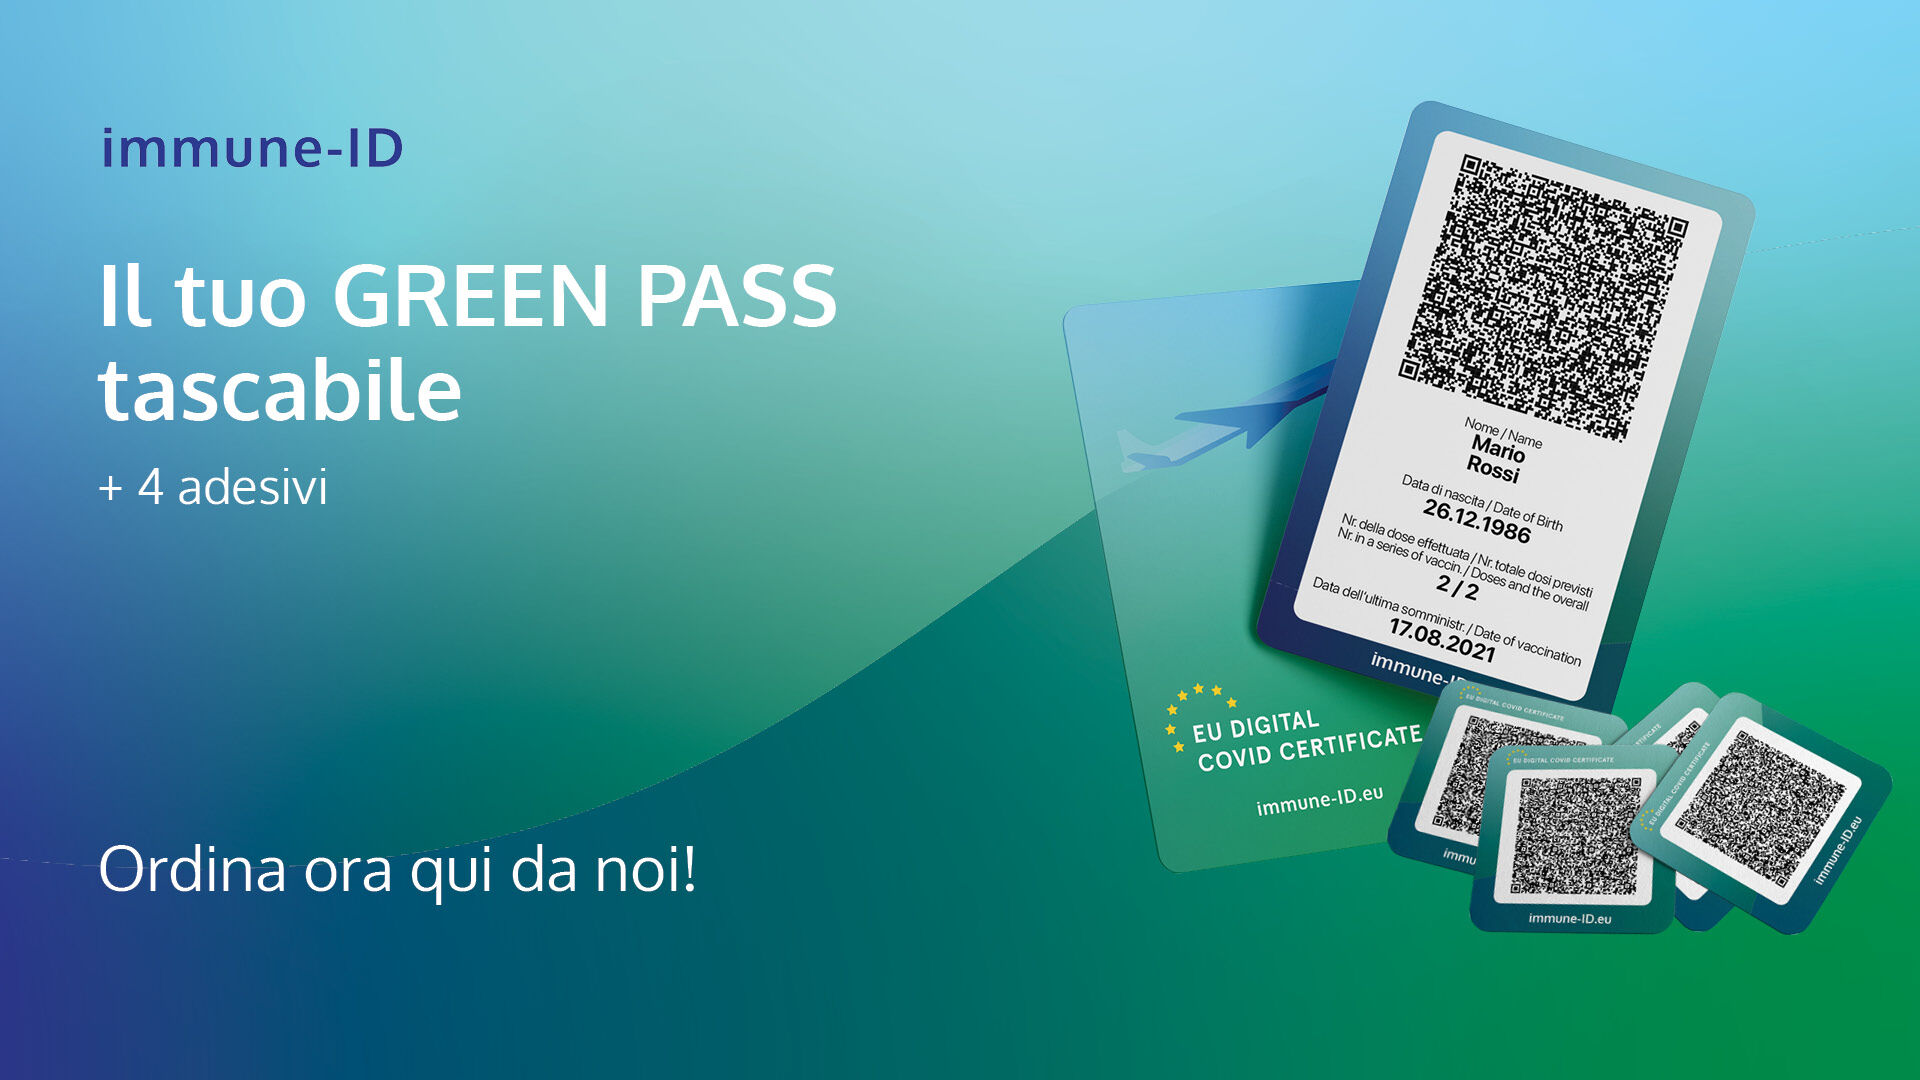 Stampa il tuo GREEN PASS